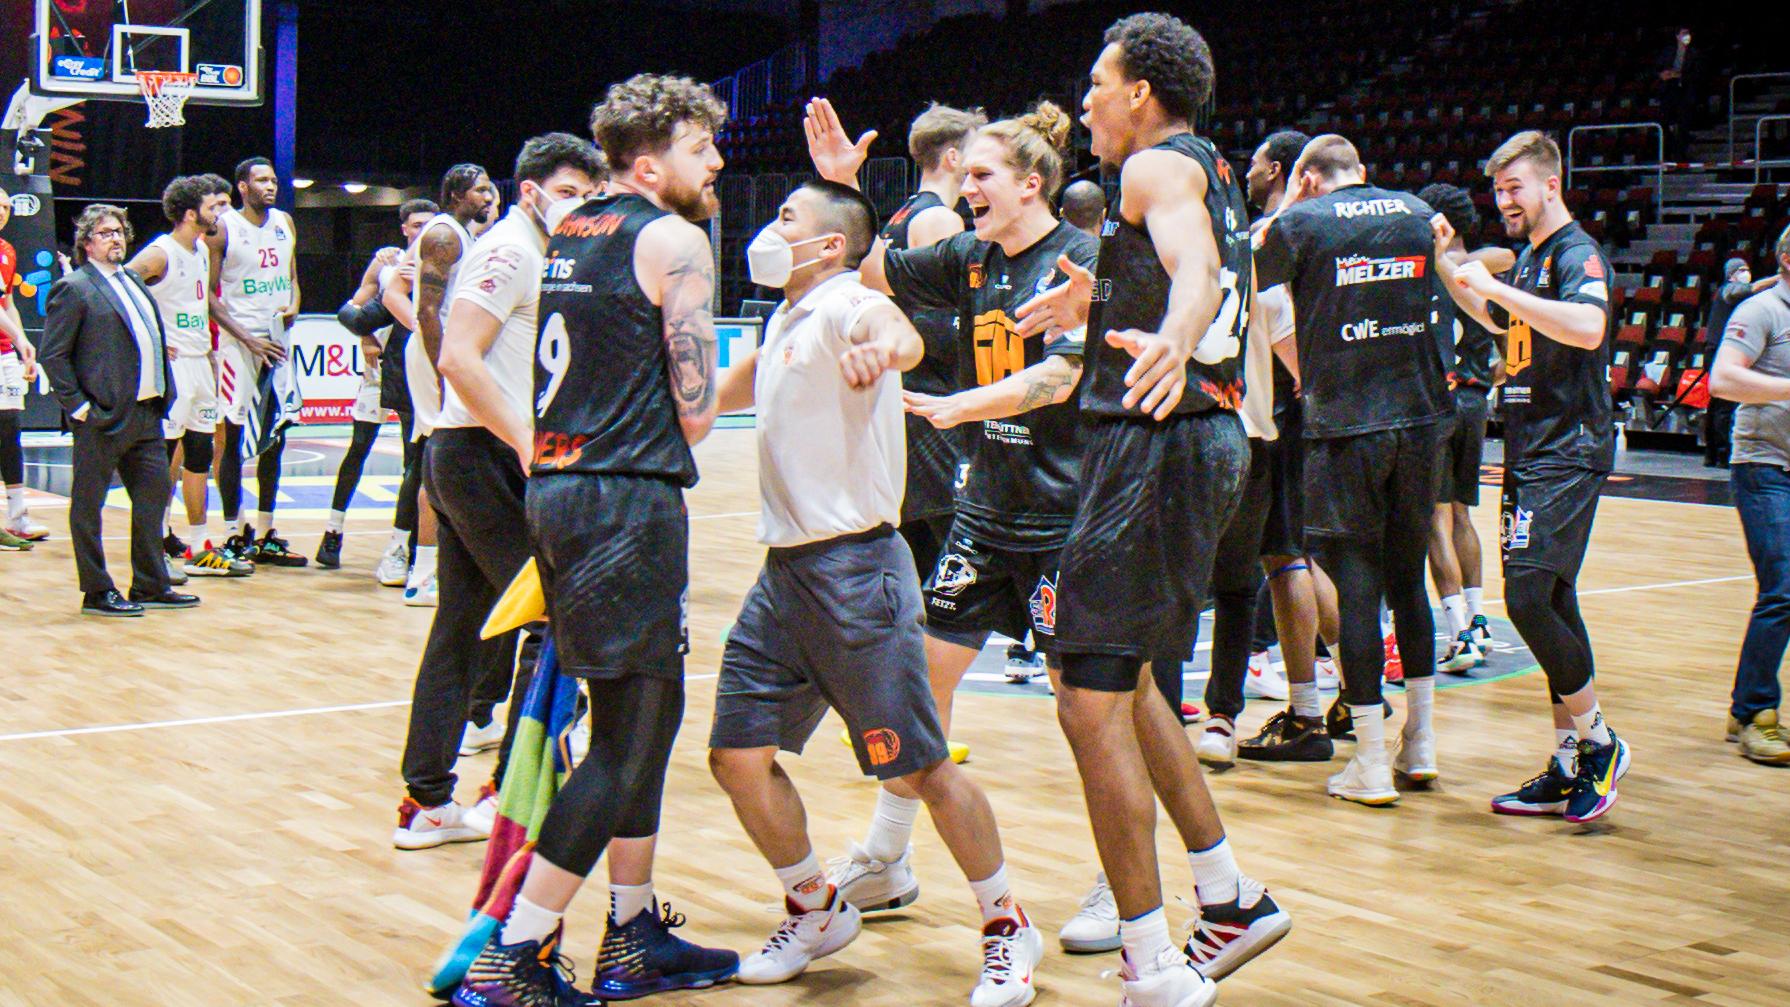 What a week in the easyCredit BBL as we saw three rounds of games - Round 17, 18 and 19 - which were highlighted by NINERS Chemnitz picking up three wins in five days, knocking off both FC Bayern Munich and Brose Bamberg in the waning seconds. Bamberg bounced back to beat ALBA BERLIN - using just seven players - while Berlin downed HAKRO Merlins Crailsheim. All the while, league leadings MHP RIESEN Ludwigsburg just keep on winning. By the way, we broke down this week’s action by clubs.